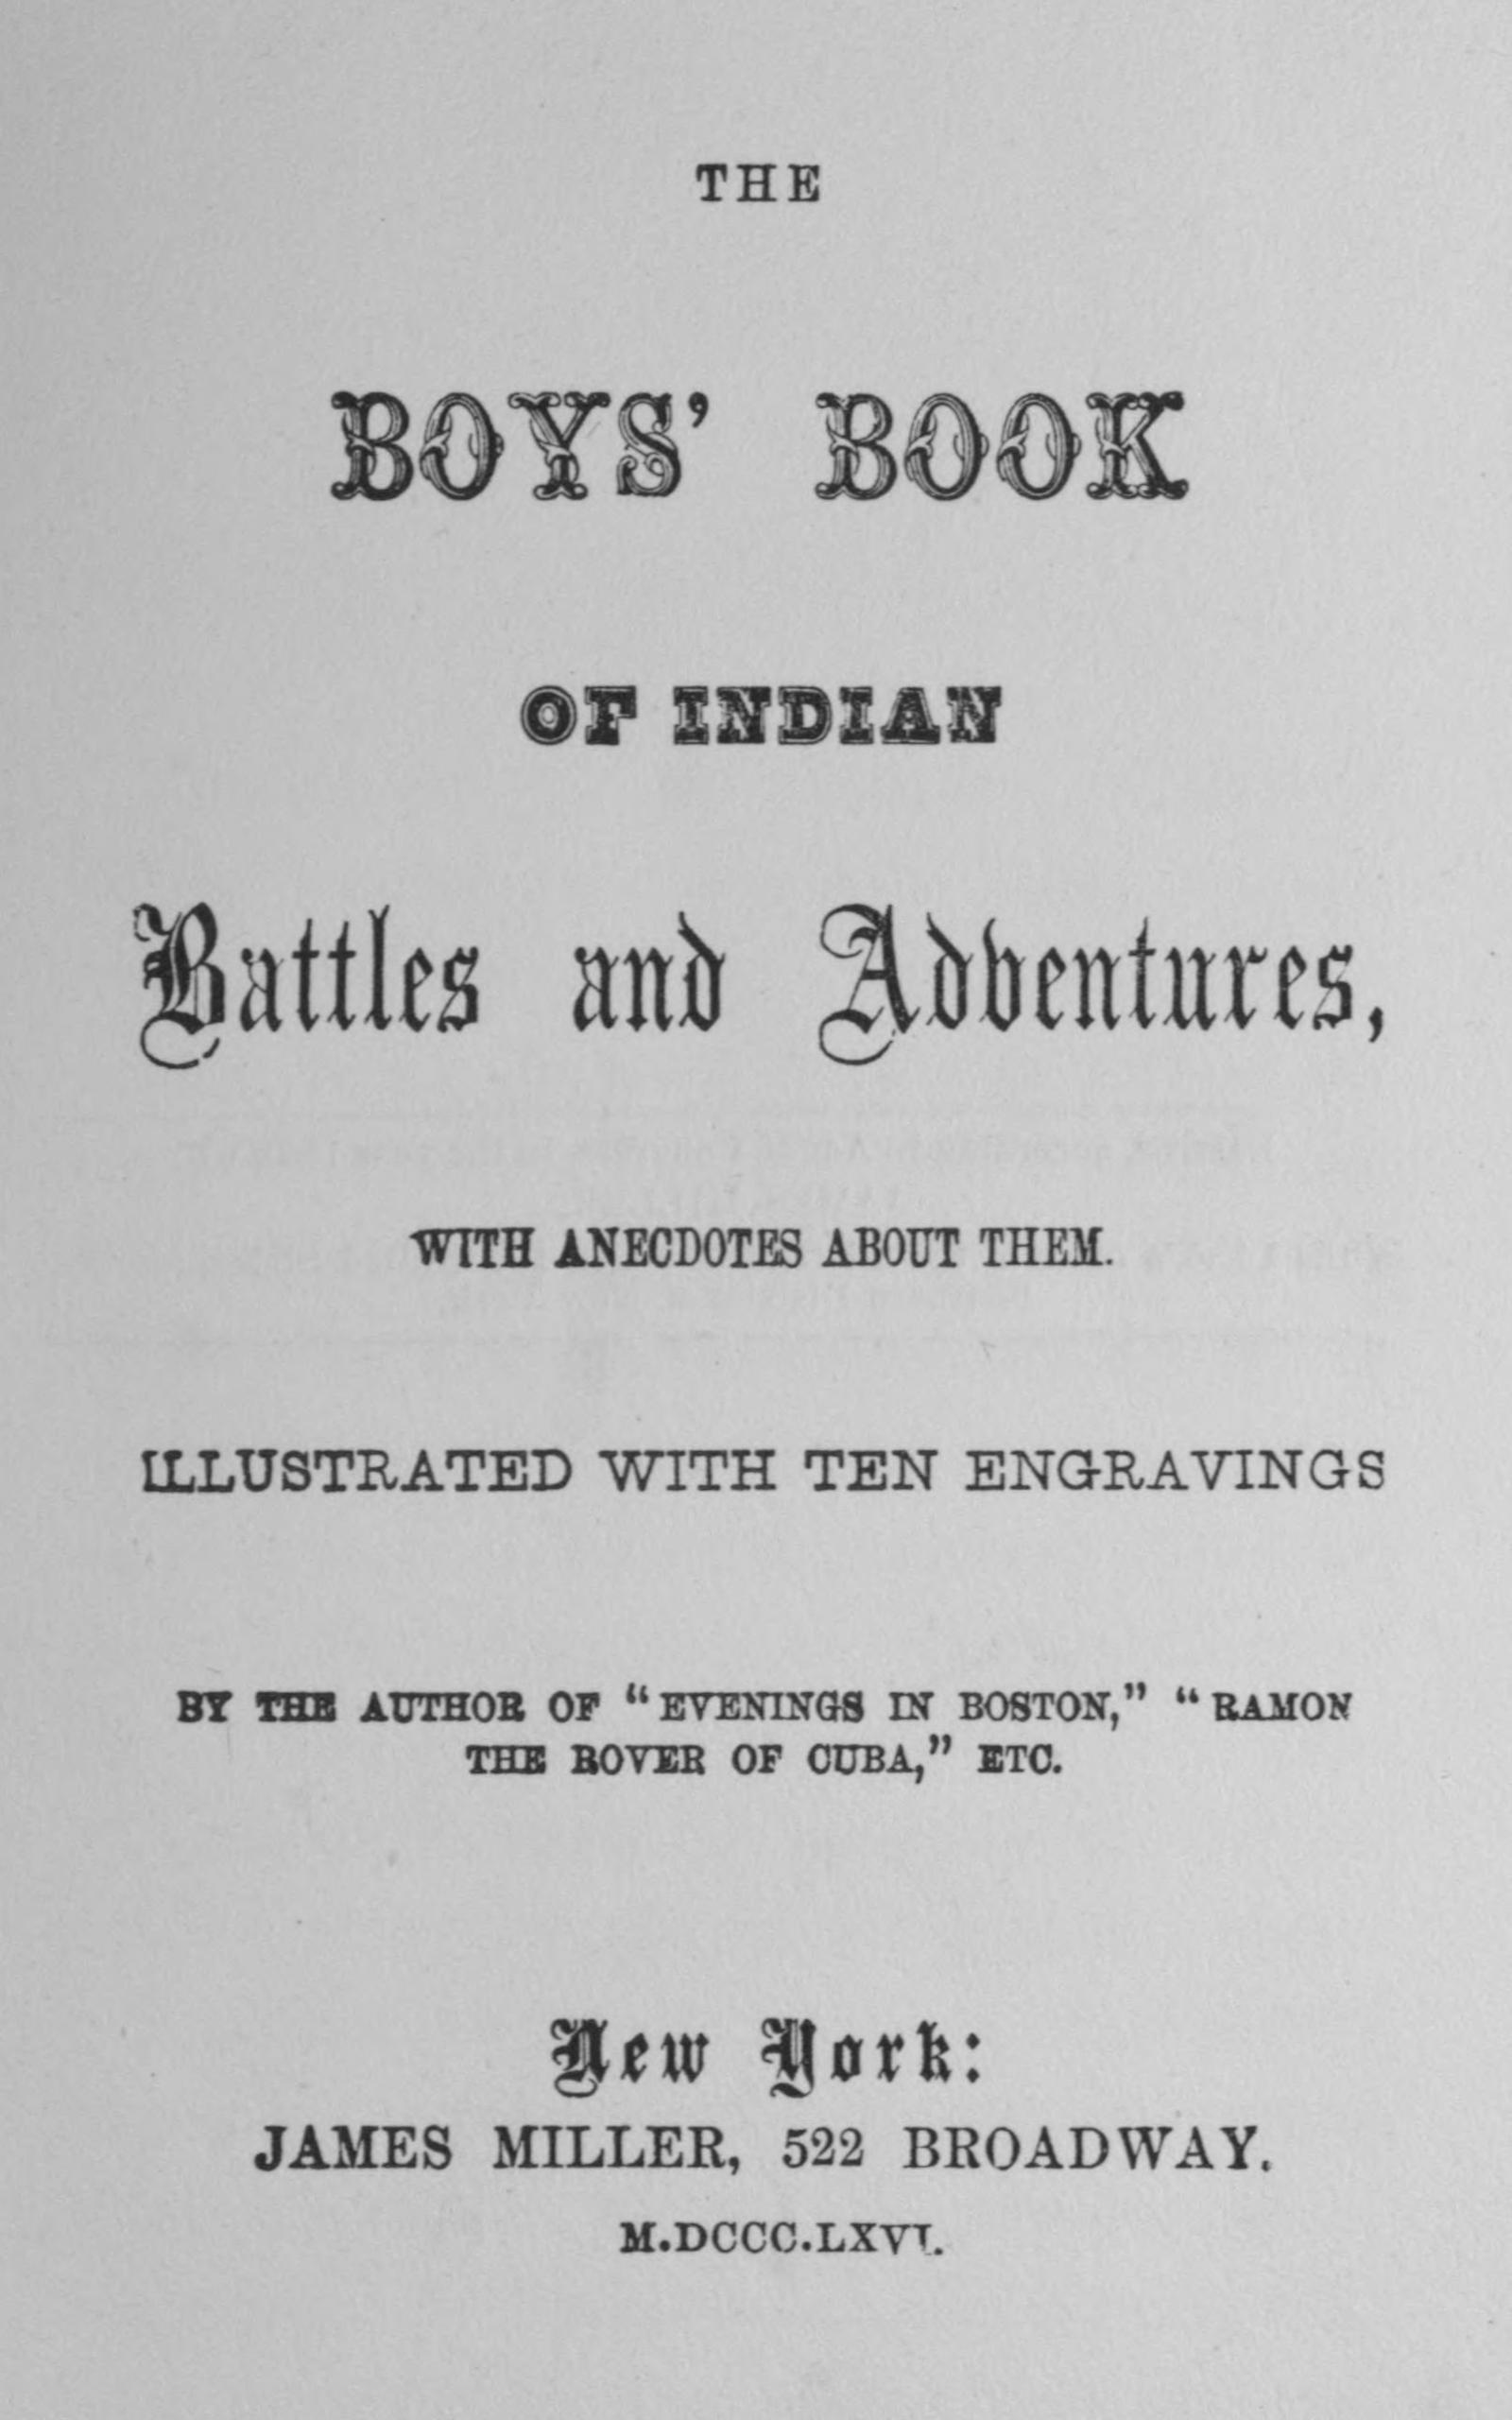 The boys' book of Indian battles and adventures, with anecdotes about them